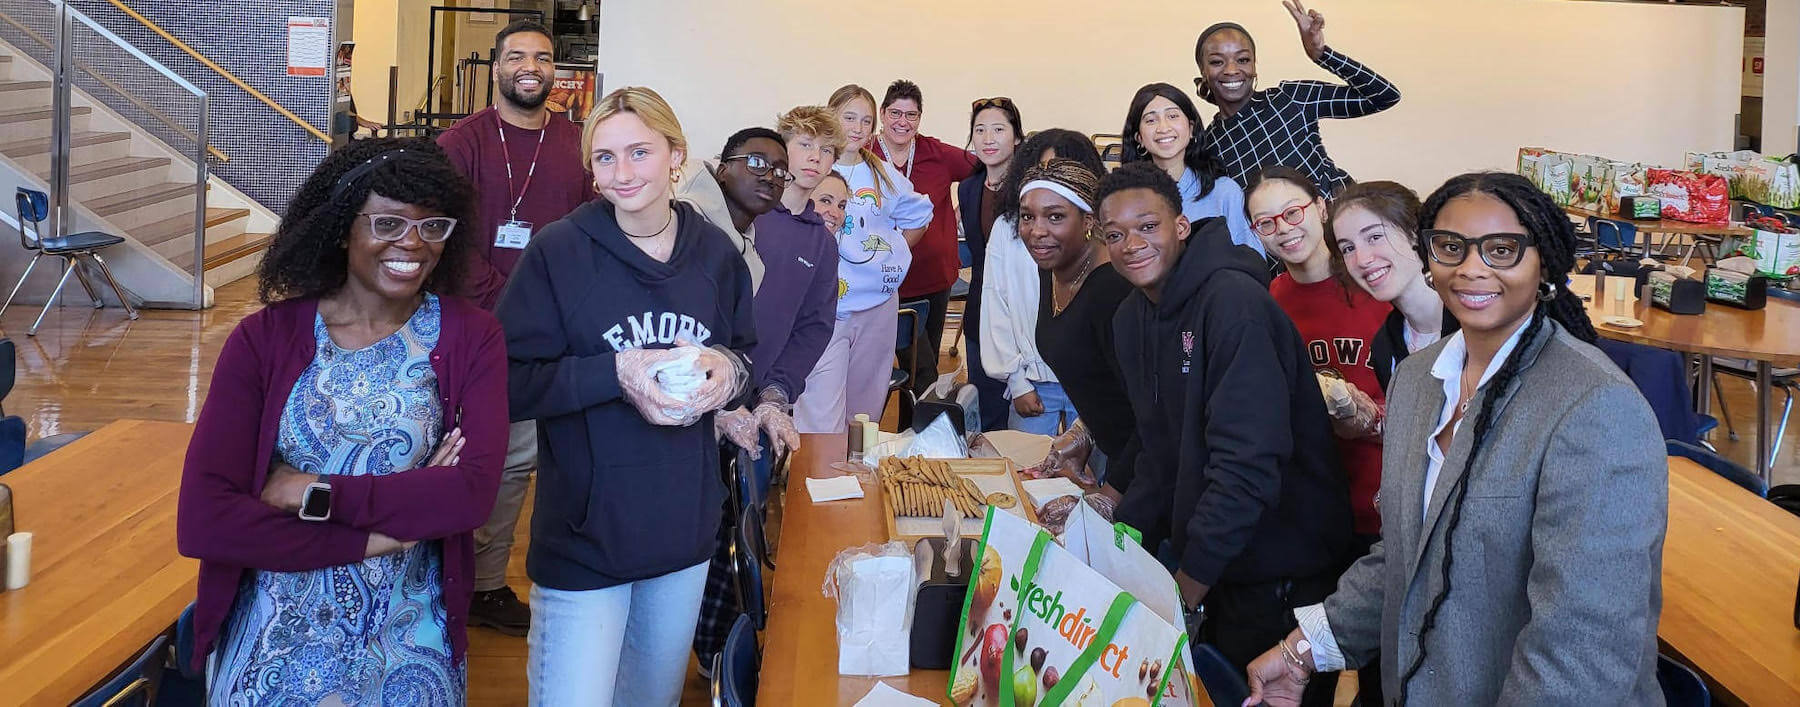 A group of Ethical Culture Fieldston School students pack lunch for a community fridge.